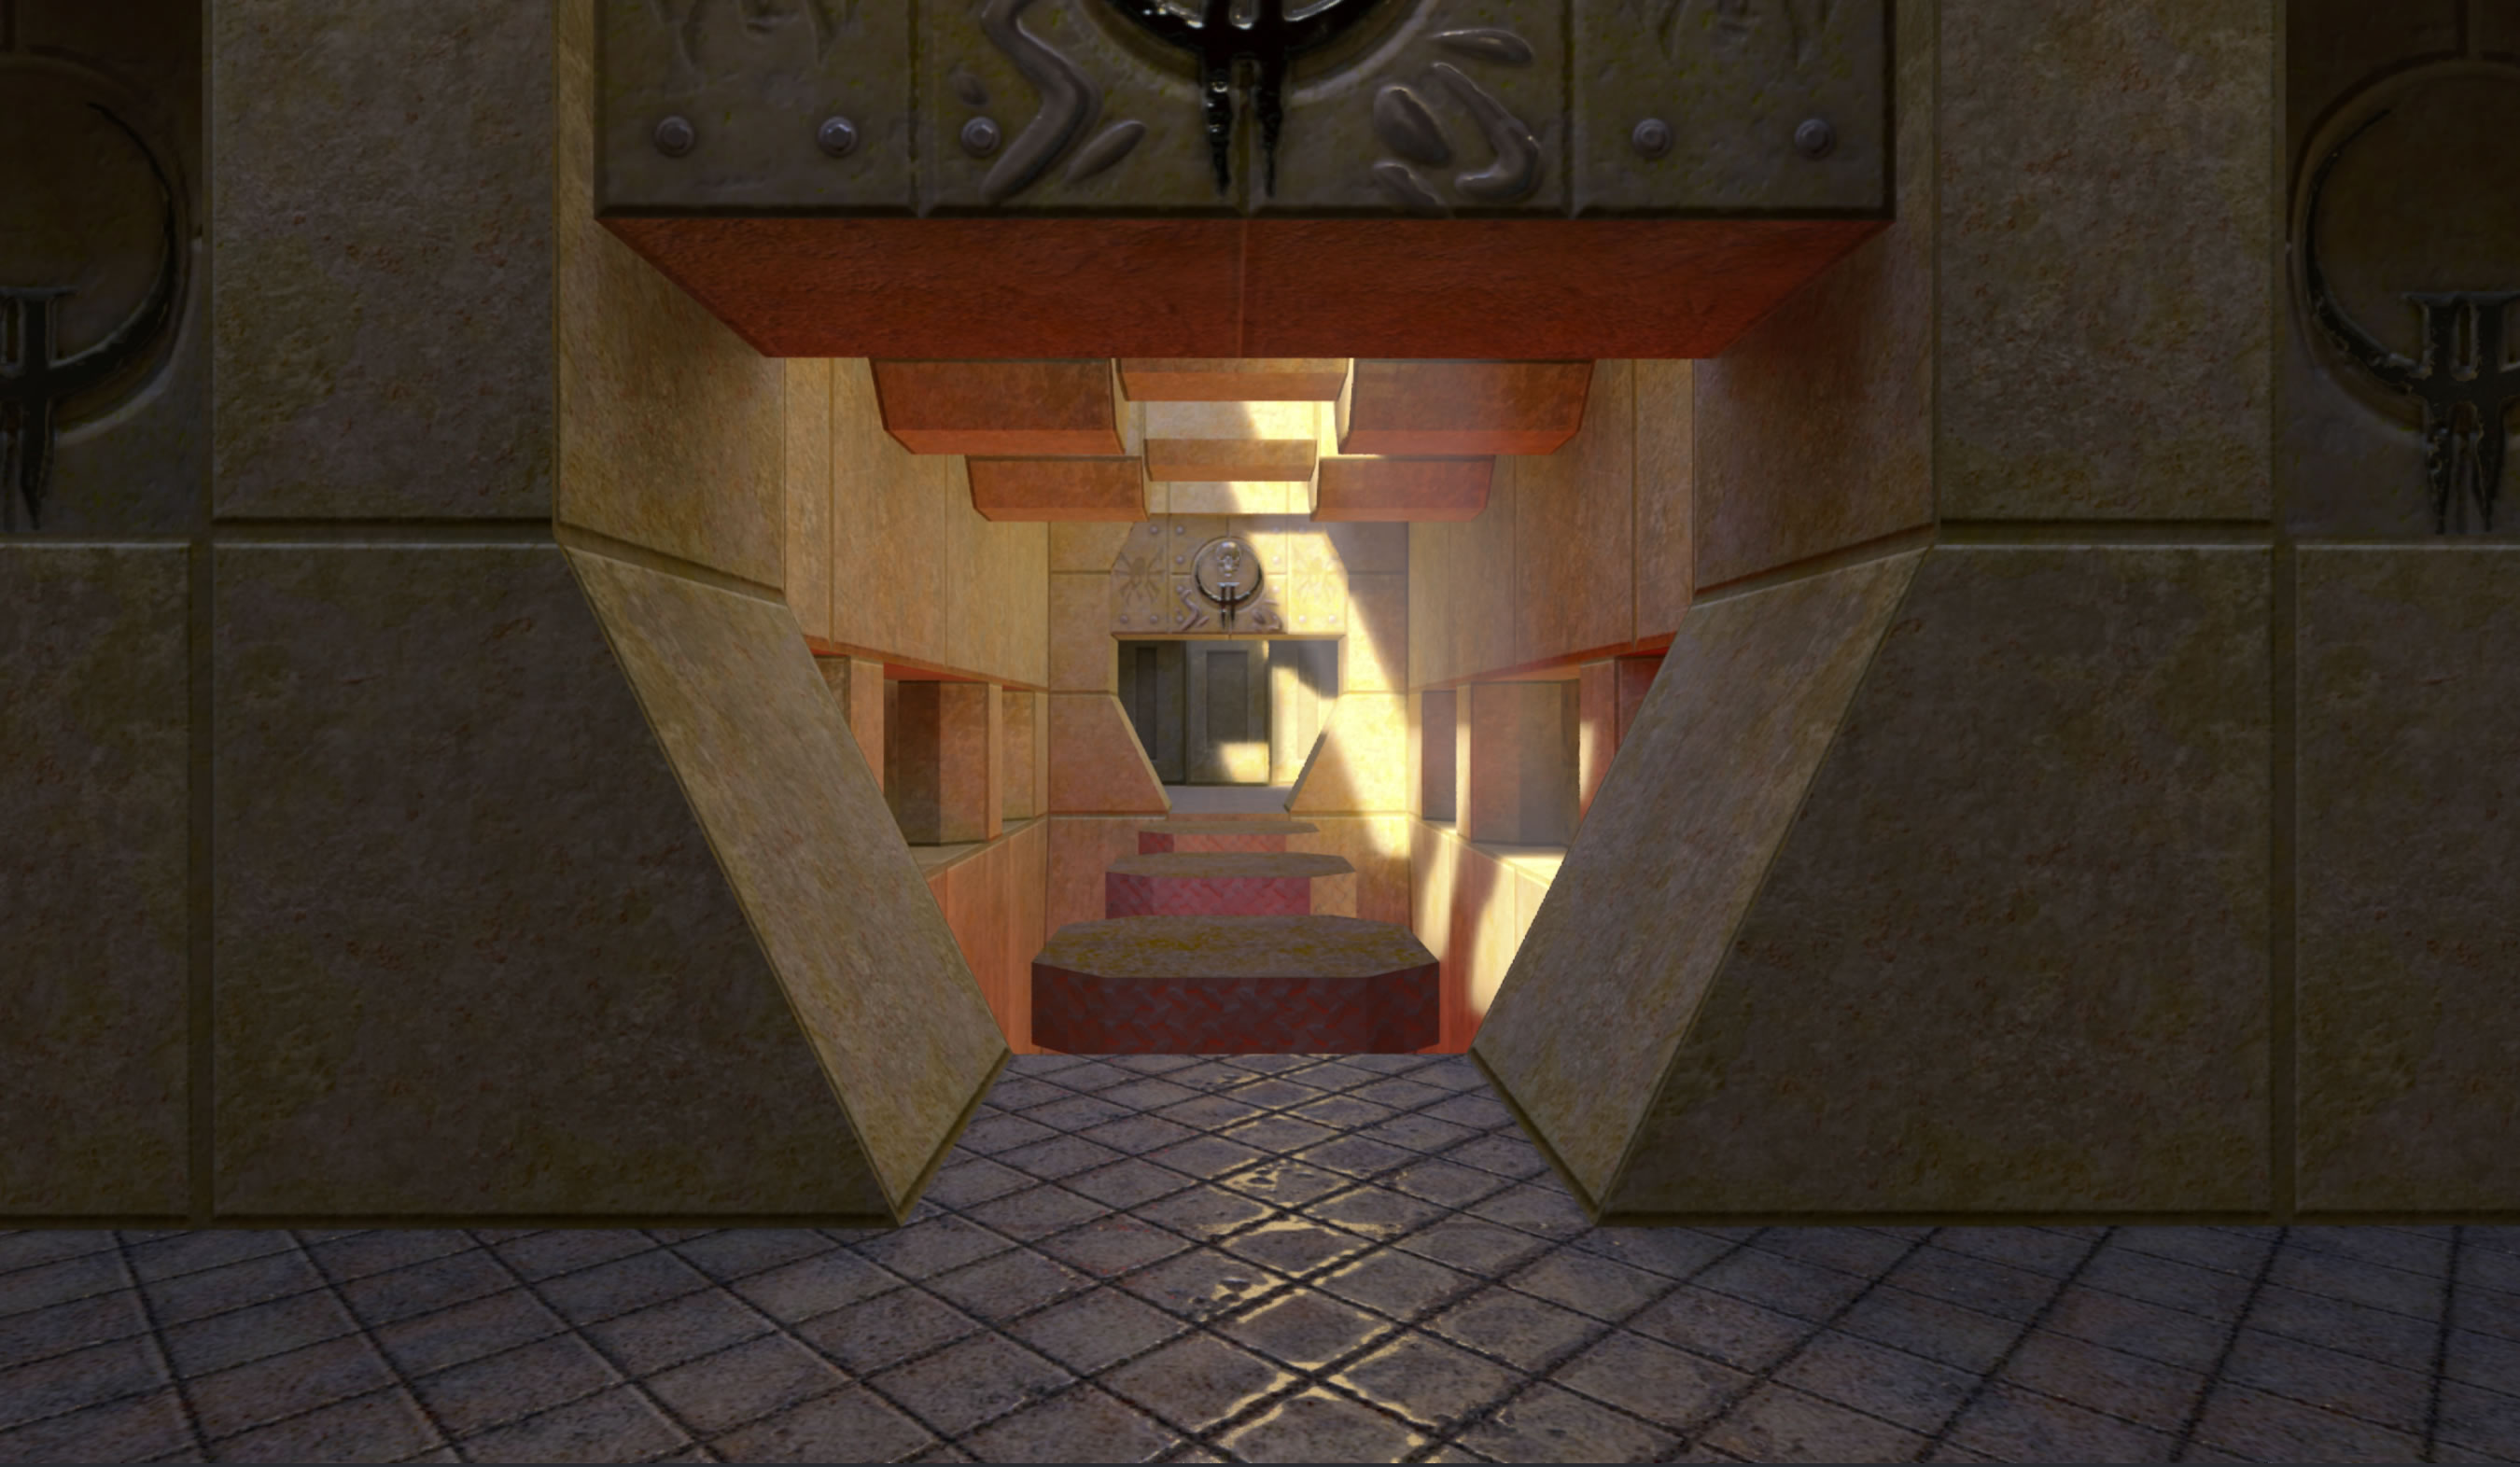 Quake II has received an RTX makeover, now available to download